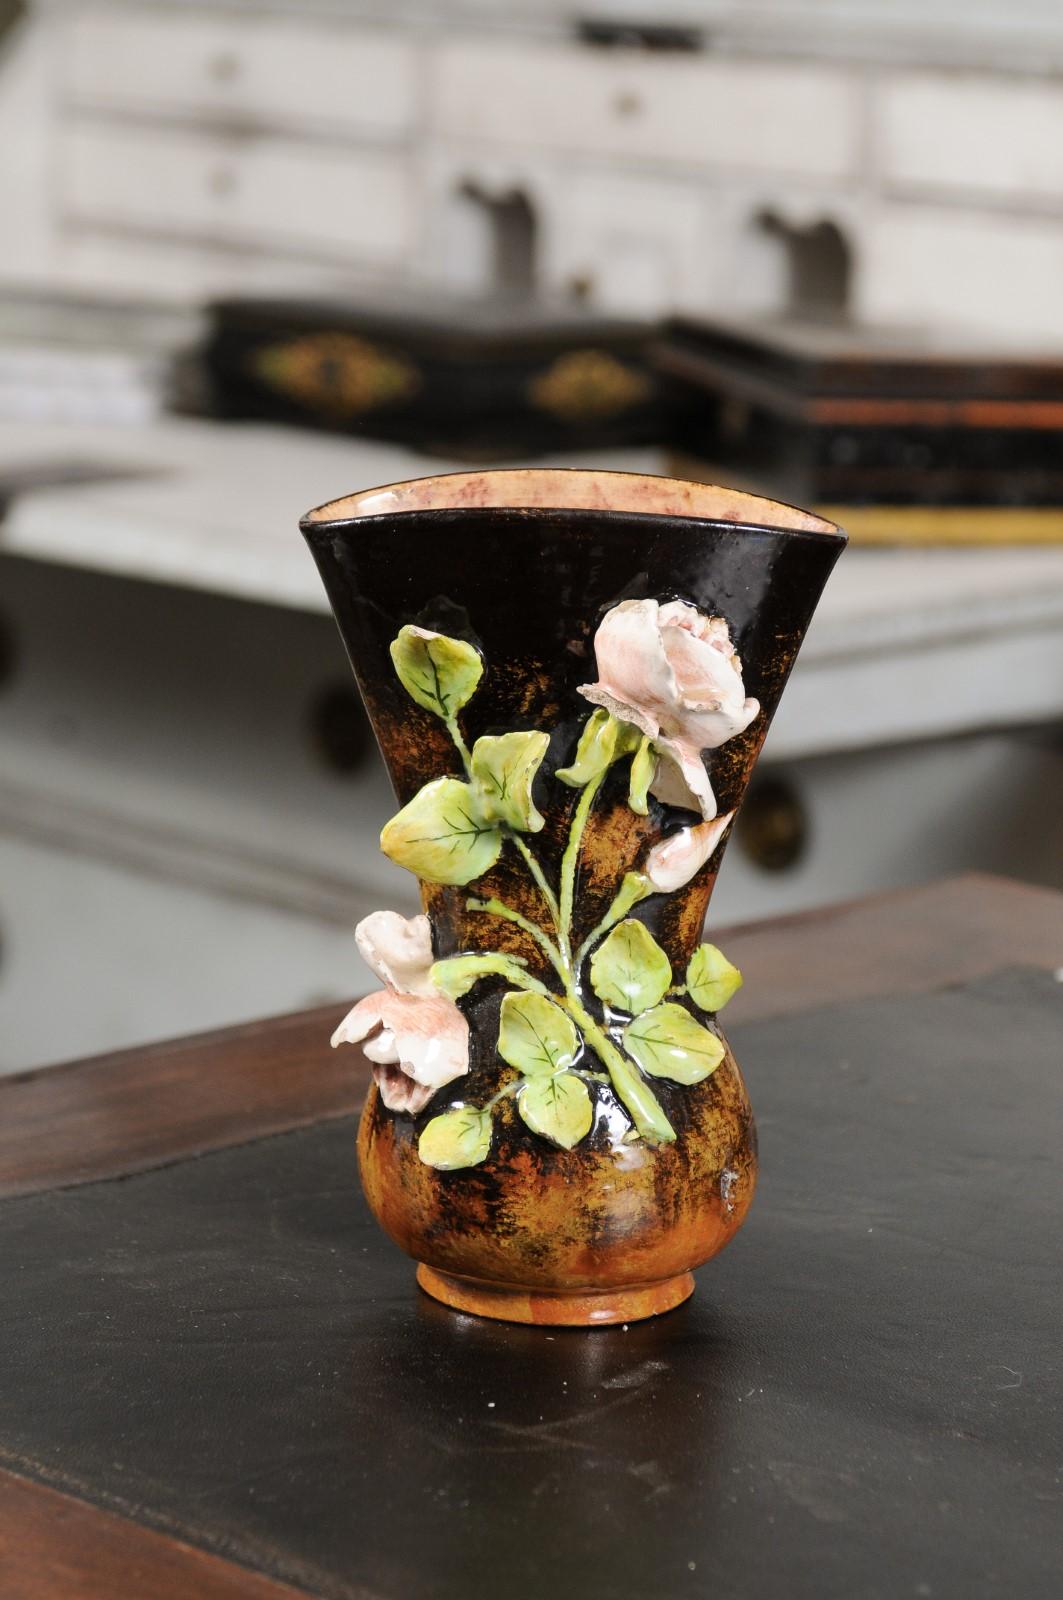 A French barbotine vase from the 19th century, with high relief floral décor. Created in France during the 19th century, this barbotine vase features a high relief floral décor made of delicate pink roses and their green leaves, standing out